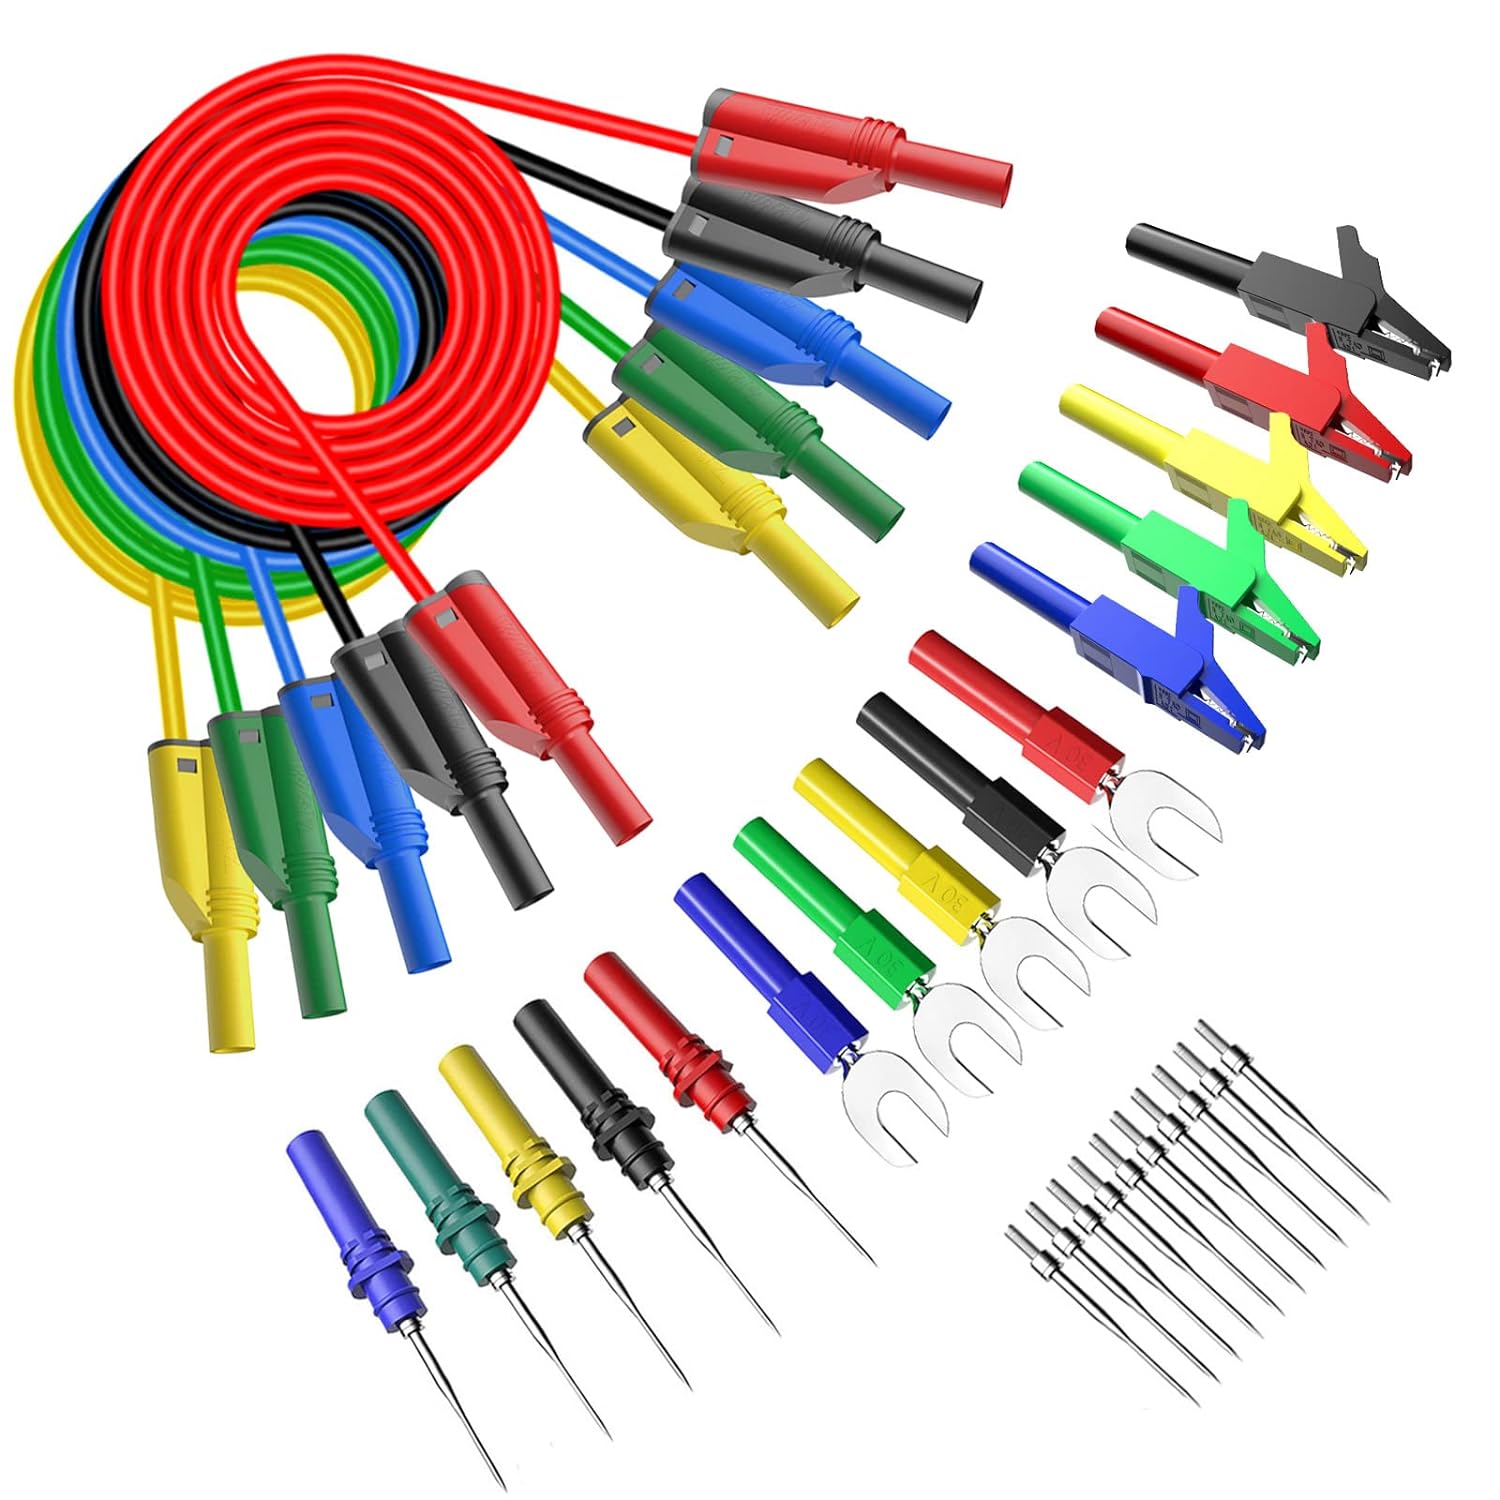 IC Test Lead Set of 5 Jumper Mini-Grabber Test Leads 12 Inch Color Coding Tool 